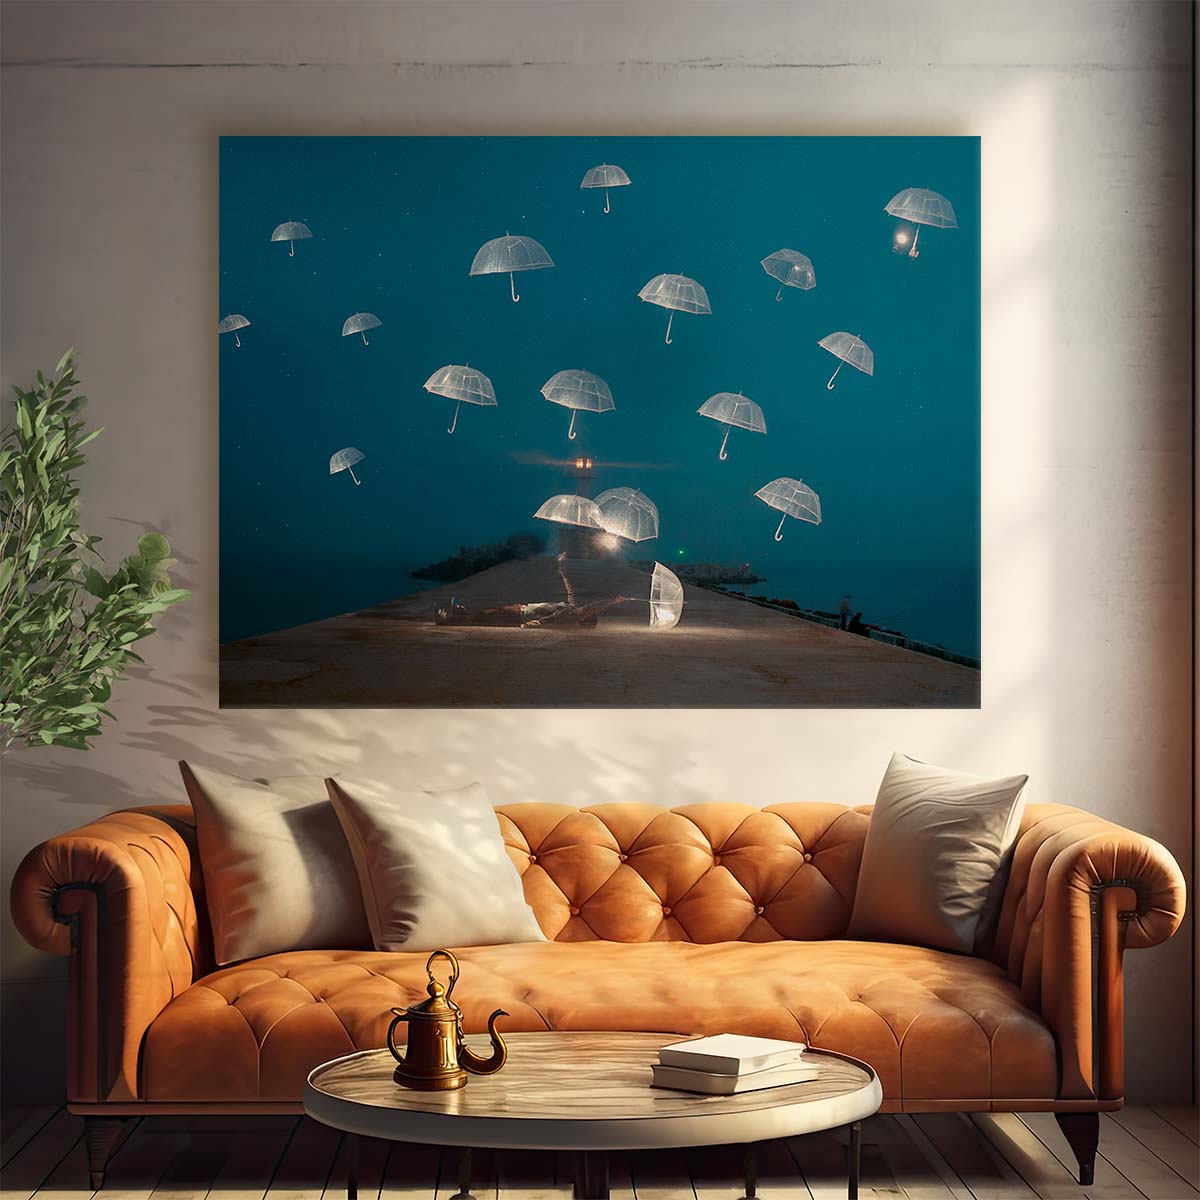 Surreal Floating Umbrellas Dreamy Night Landscape Wall Art by Luxuriance Designs. Made in USA.